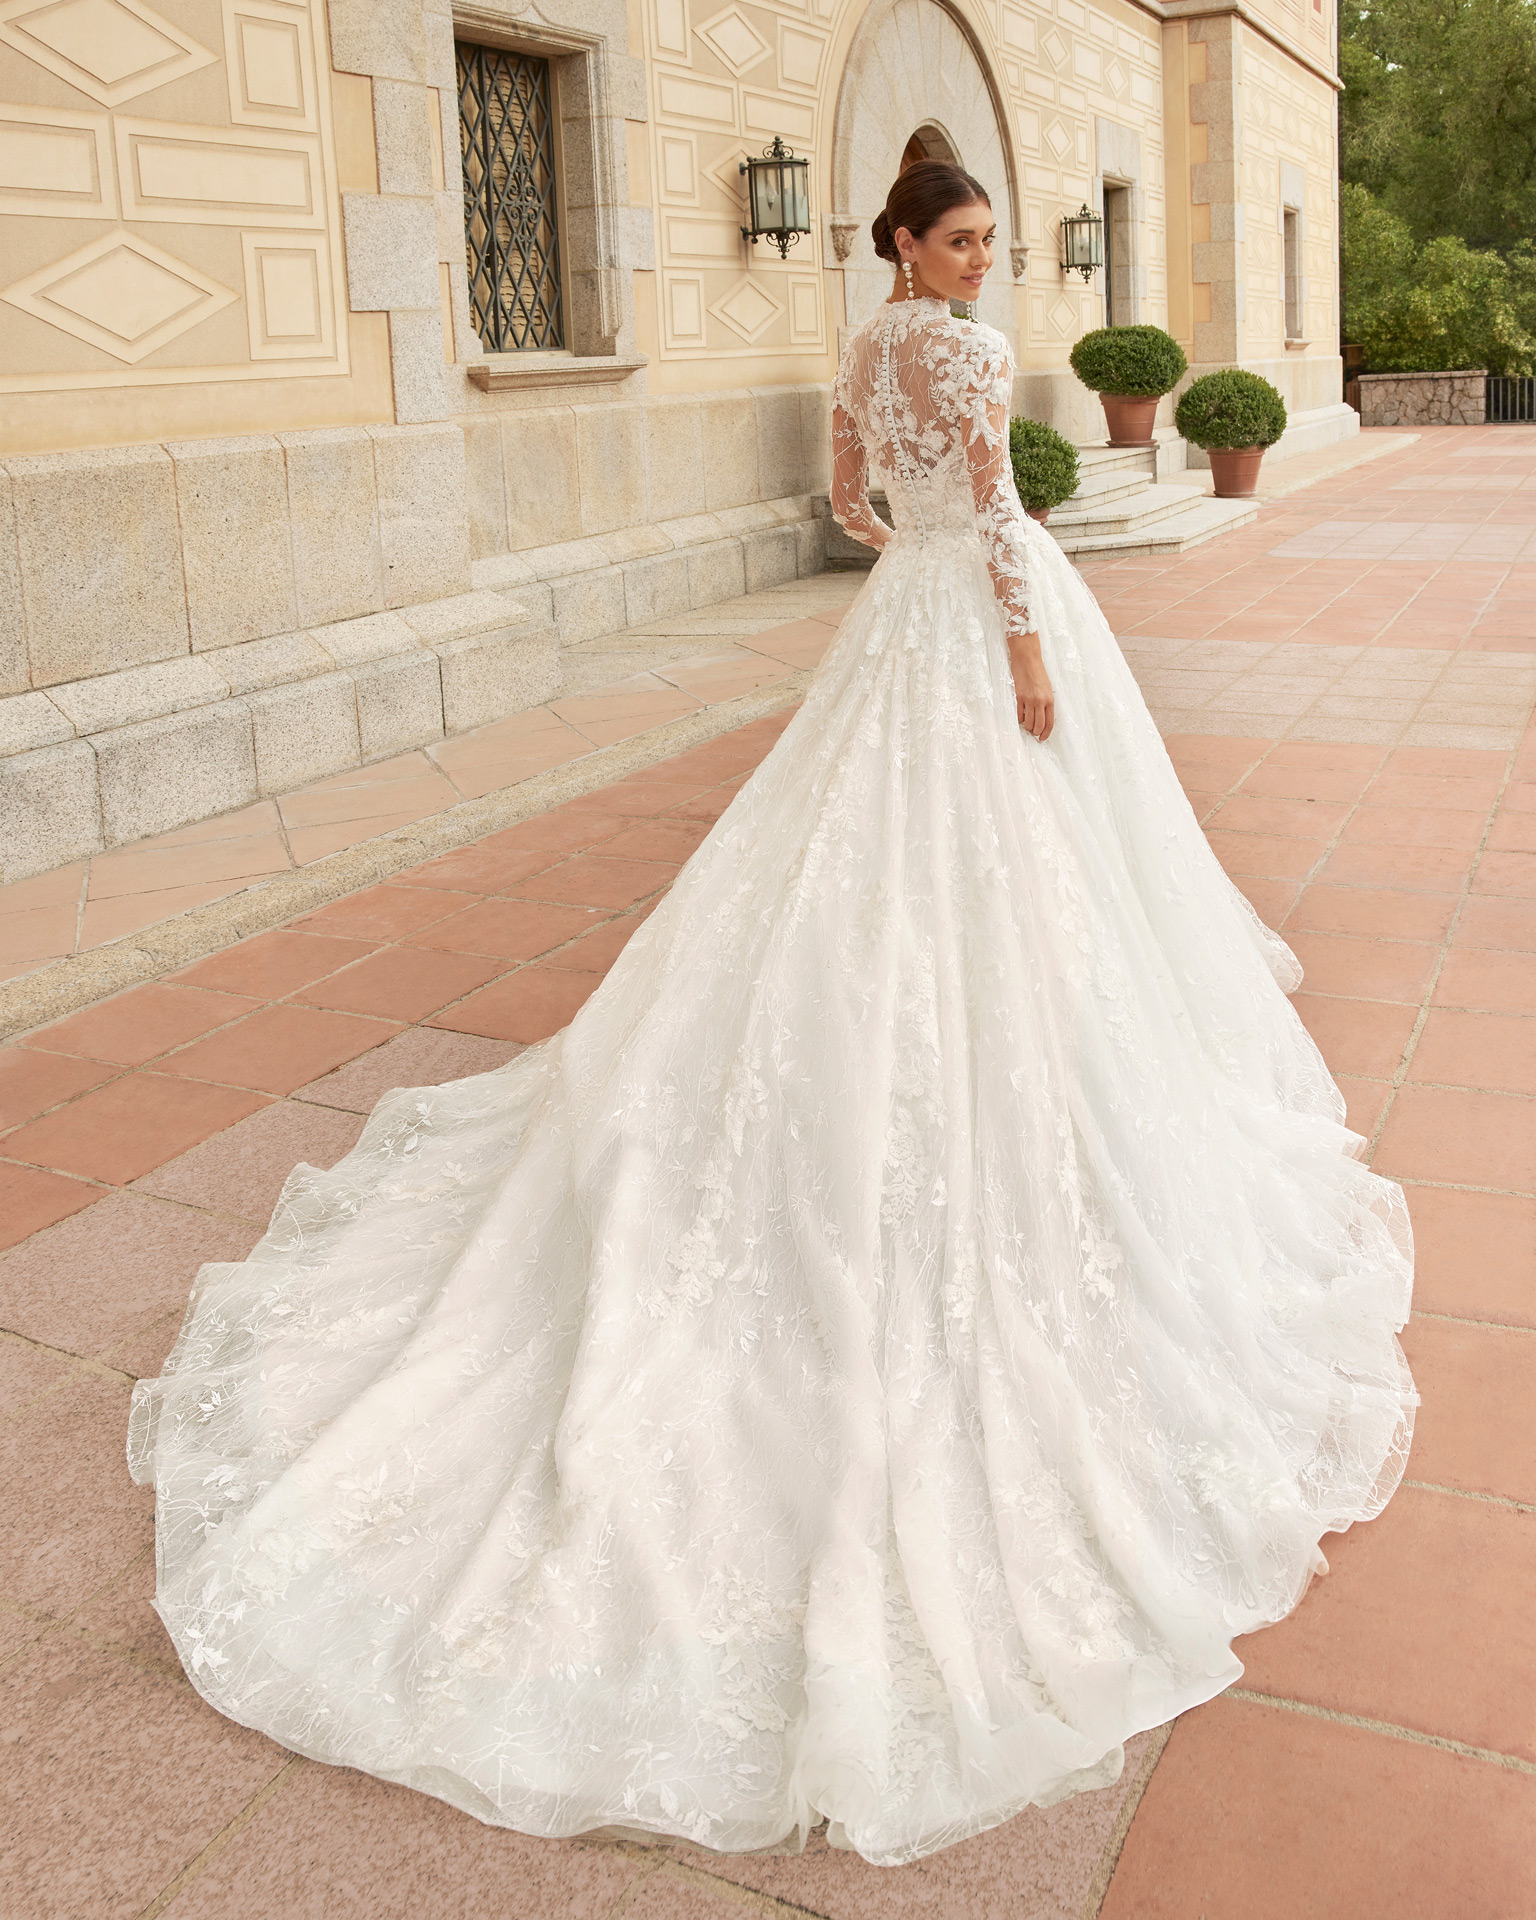 Romantic princess wedding dress, made in lace combined with beadwork. Featuring a high neck, buttoned back and long sleeves. Delight in this Luna Studio design. LUNA_NOVIAS.